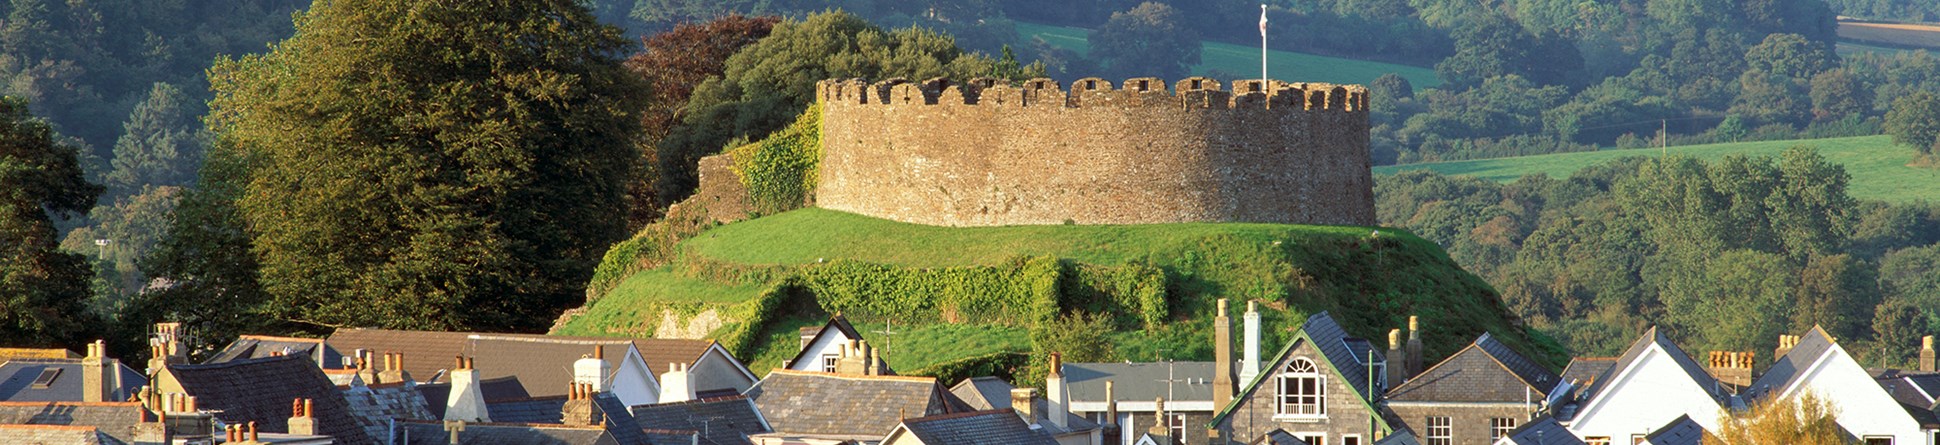 In the foreground is the pitched roofs of local houses, whilst in the background is Totnes Castle on a small hill, an example of a Norman motte and bailey castle. Rolling hills and woodlands can be seen in the background. Photo is taken in late spring or early summer.